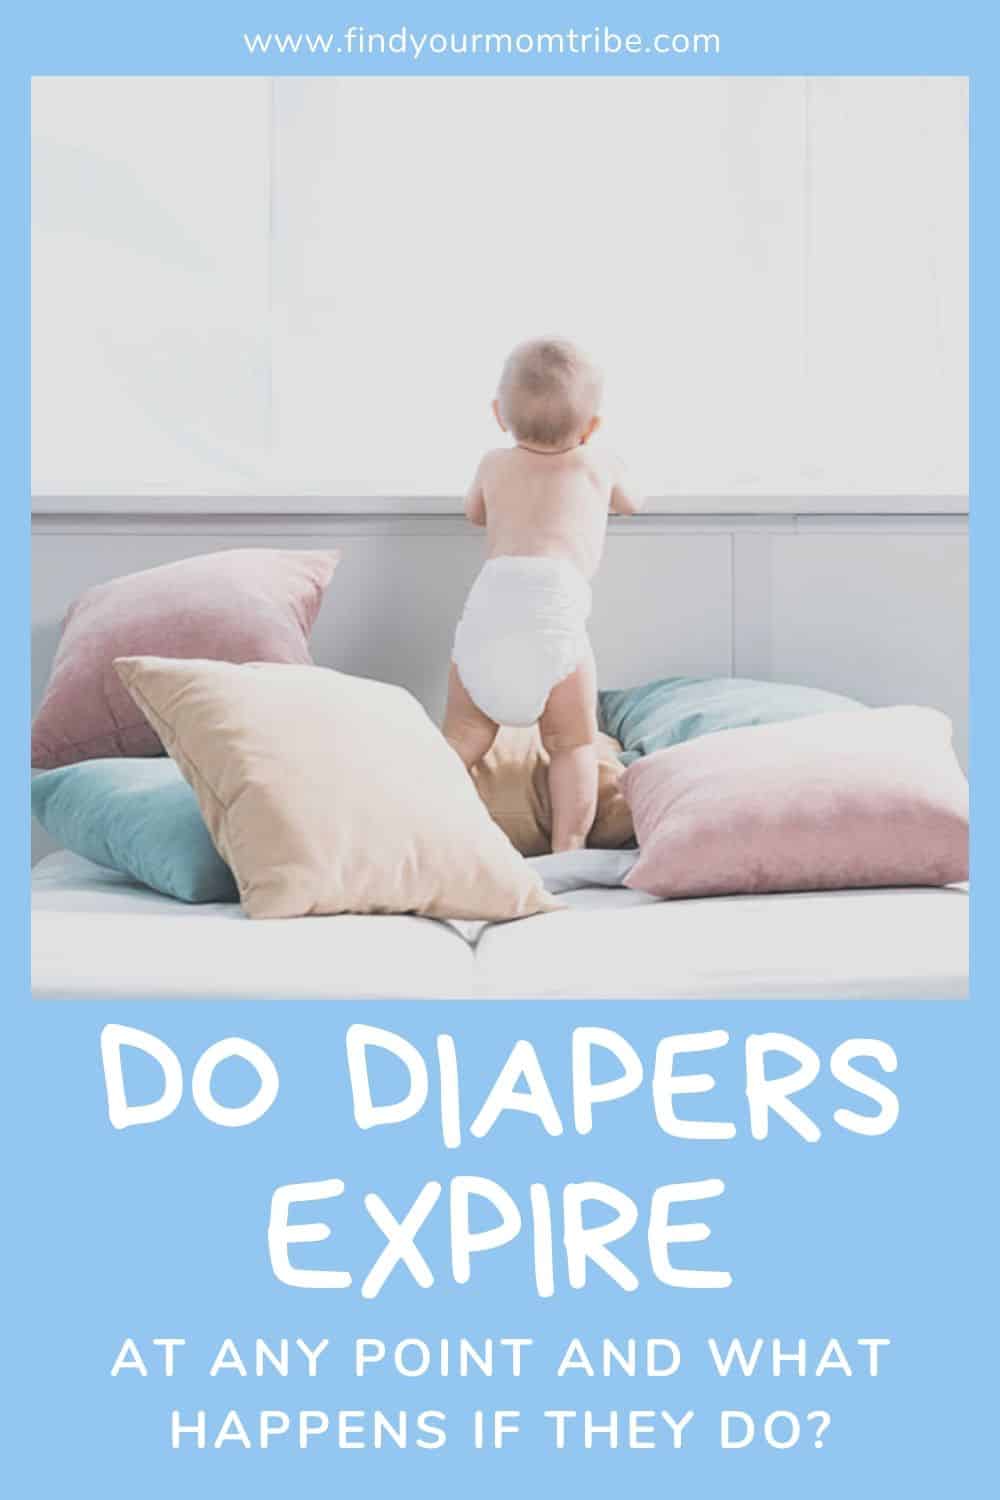 Do Diapers Expire At Any Point And What Happens If They Do?